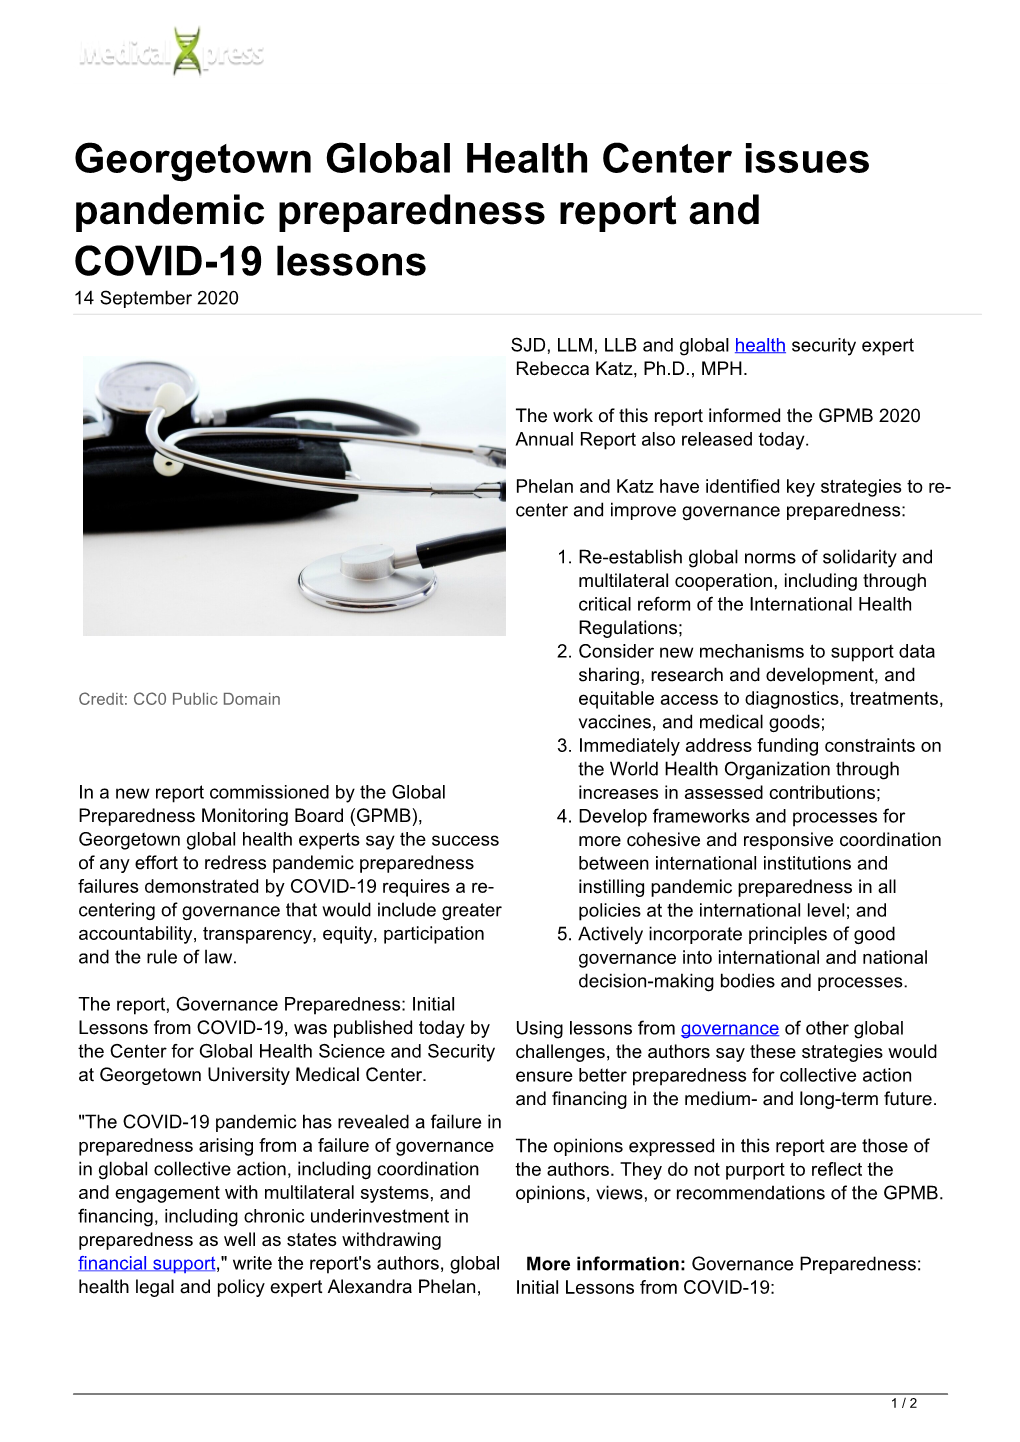 Georgetown Global Health Center Issues Pandemic Preparedness Report and COVID-19 Lessons 14 September 2020